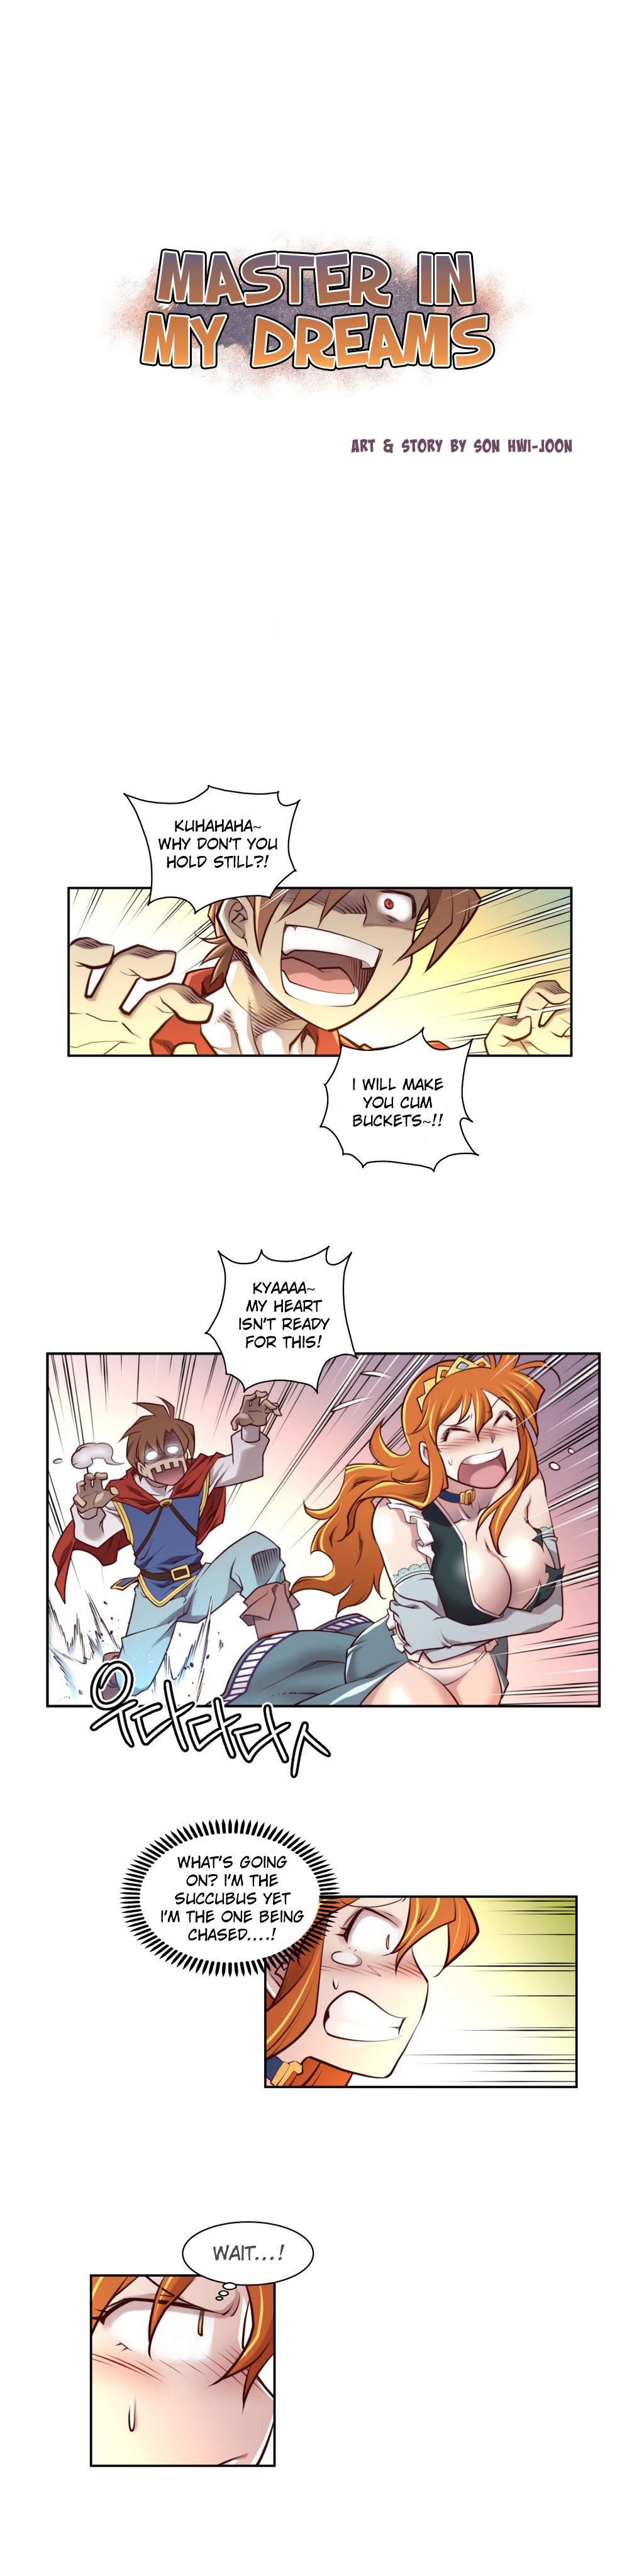 Master in My Dreams - Chapter 3 Page 1